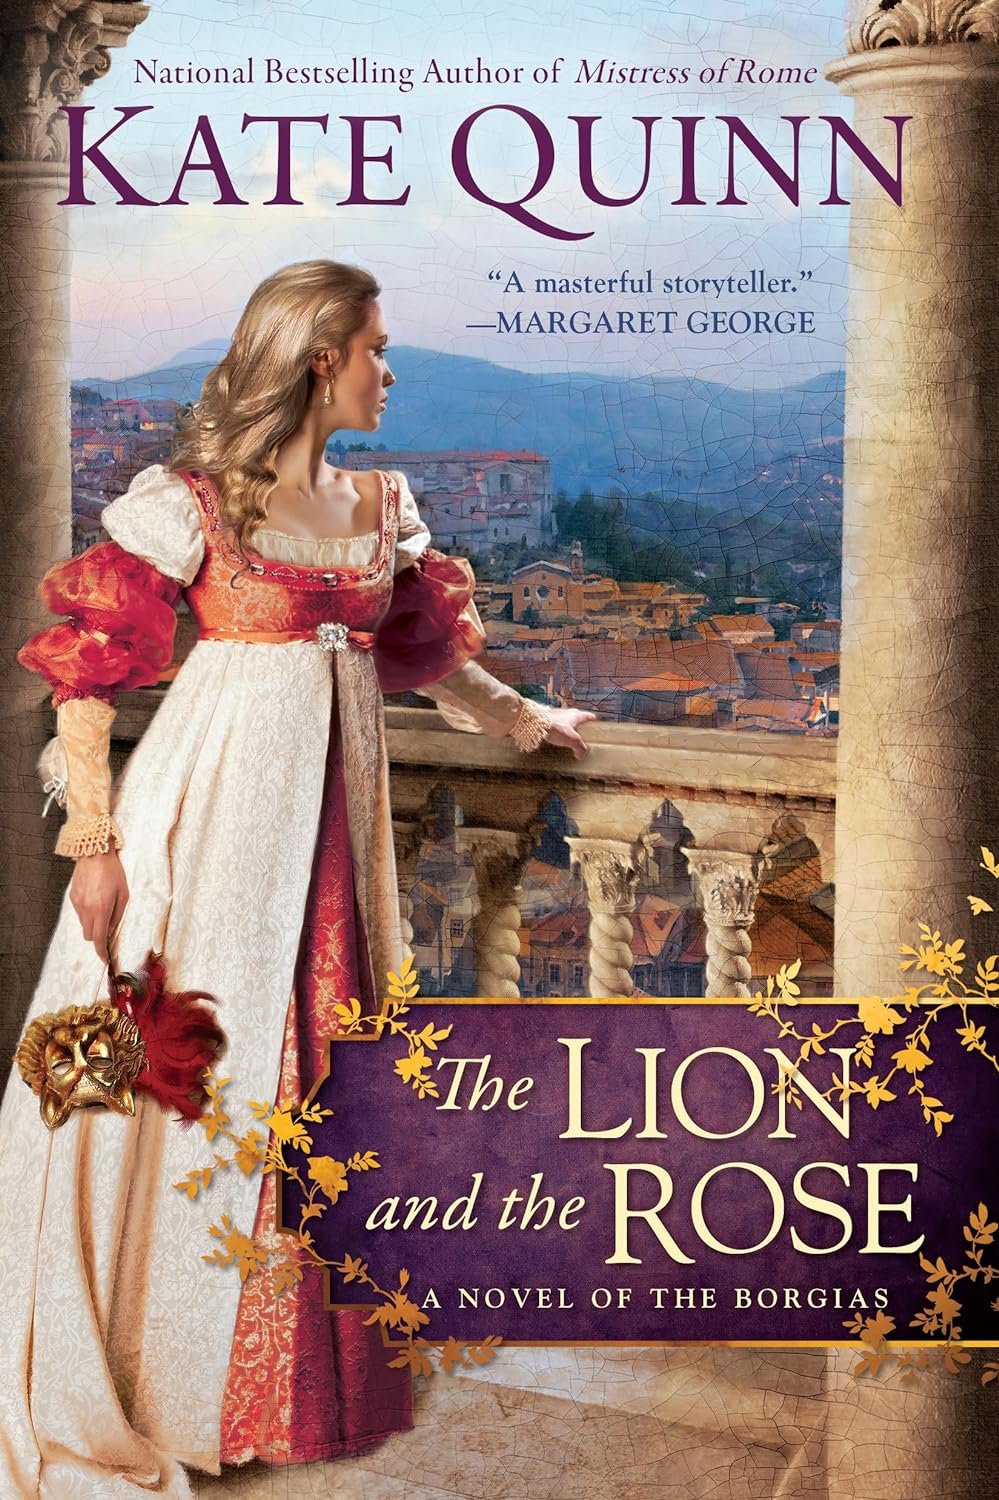 The Lion and the Rose by Kate Quinn.jpg